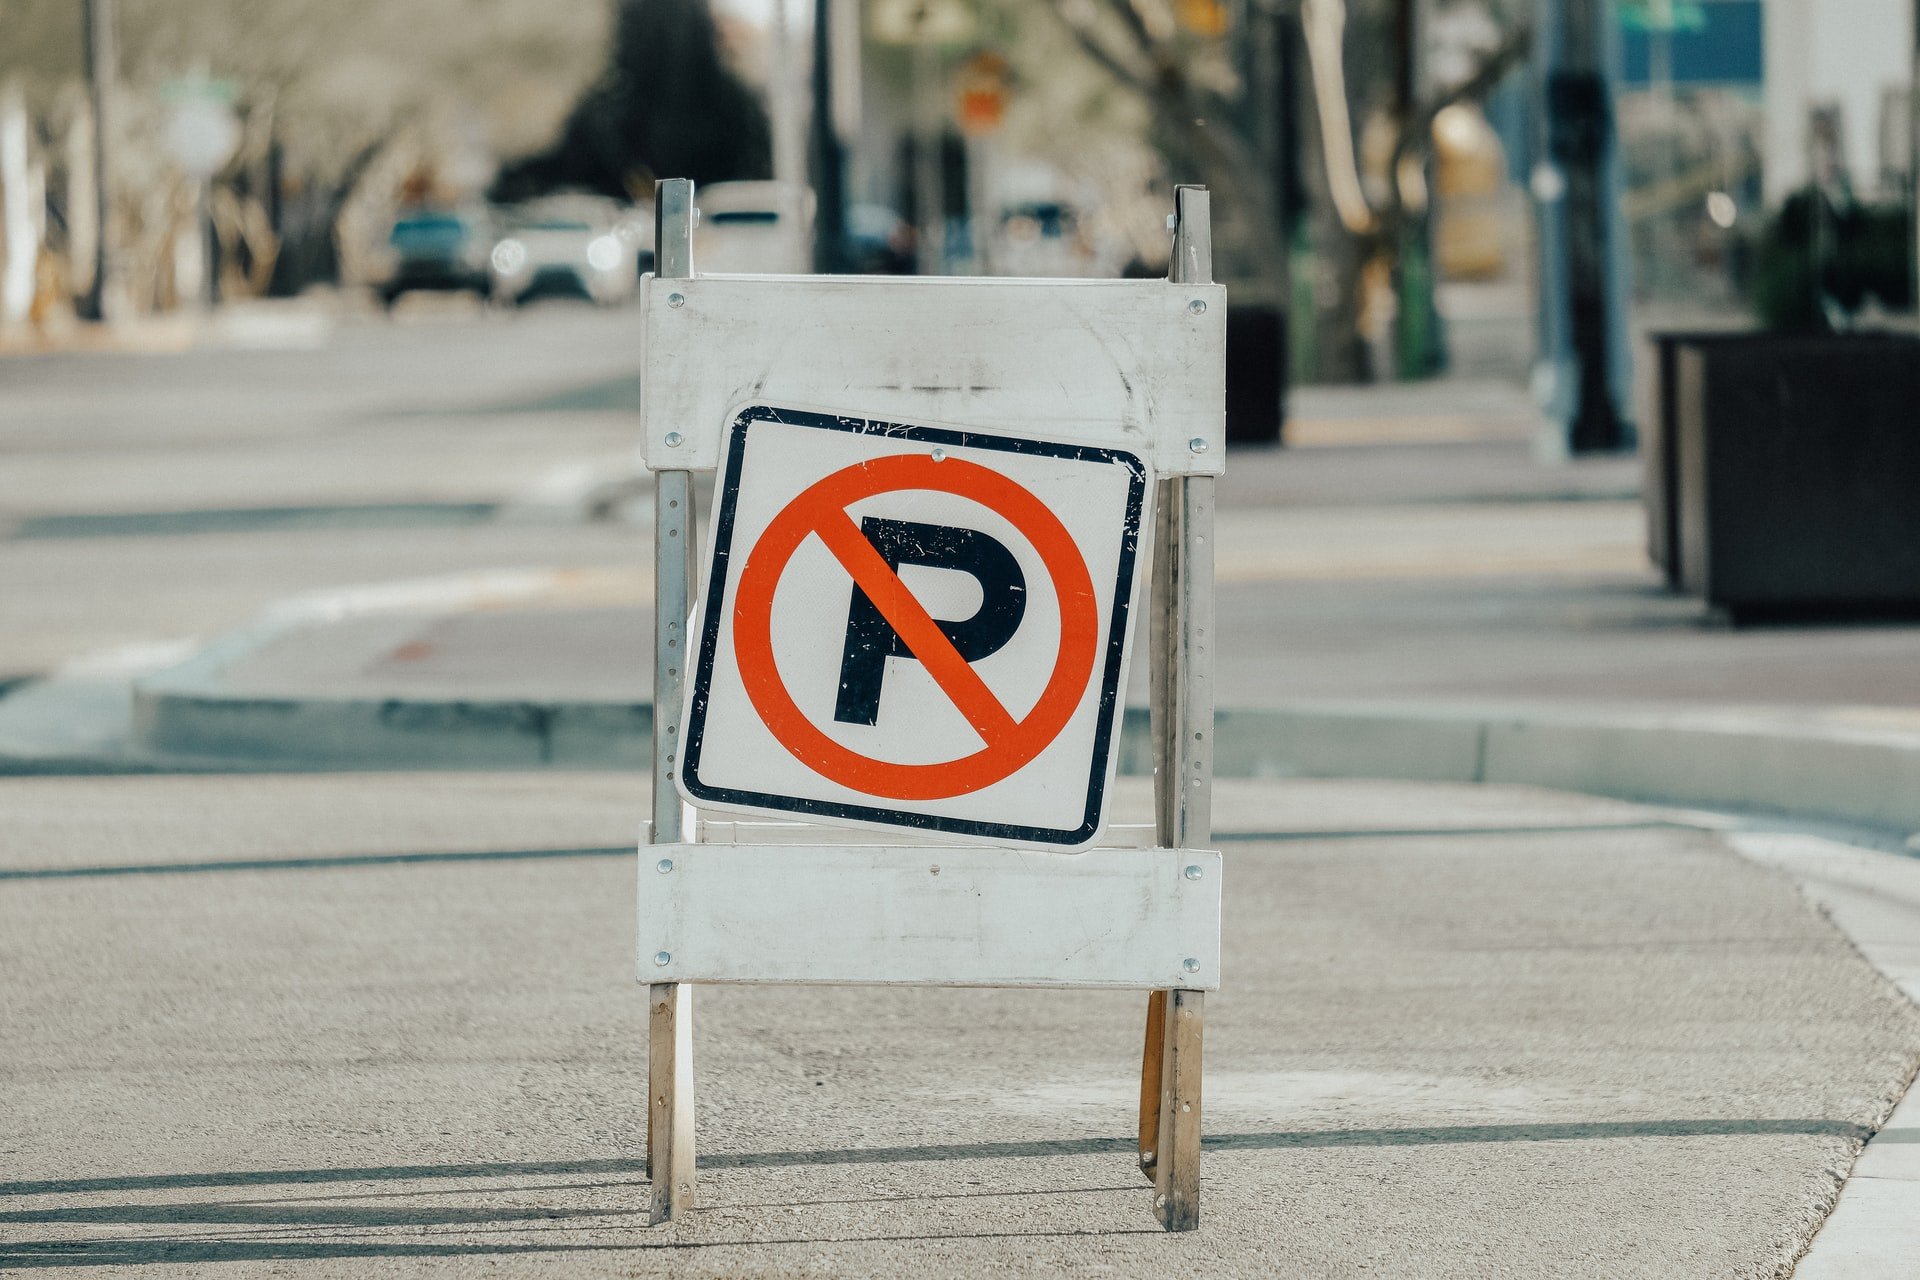 The Redditor's mother parked illegally | Source: Unsplash